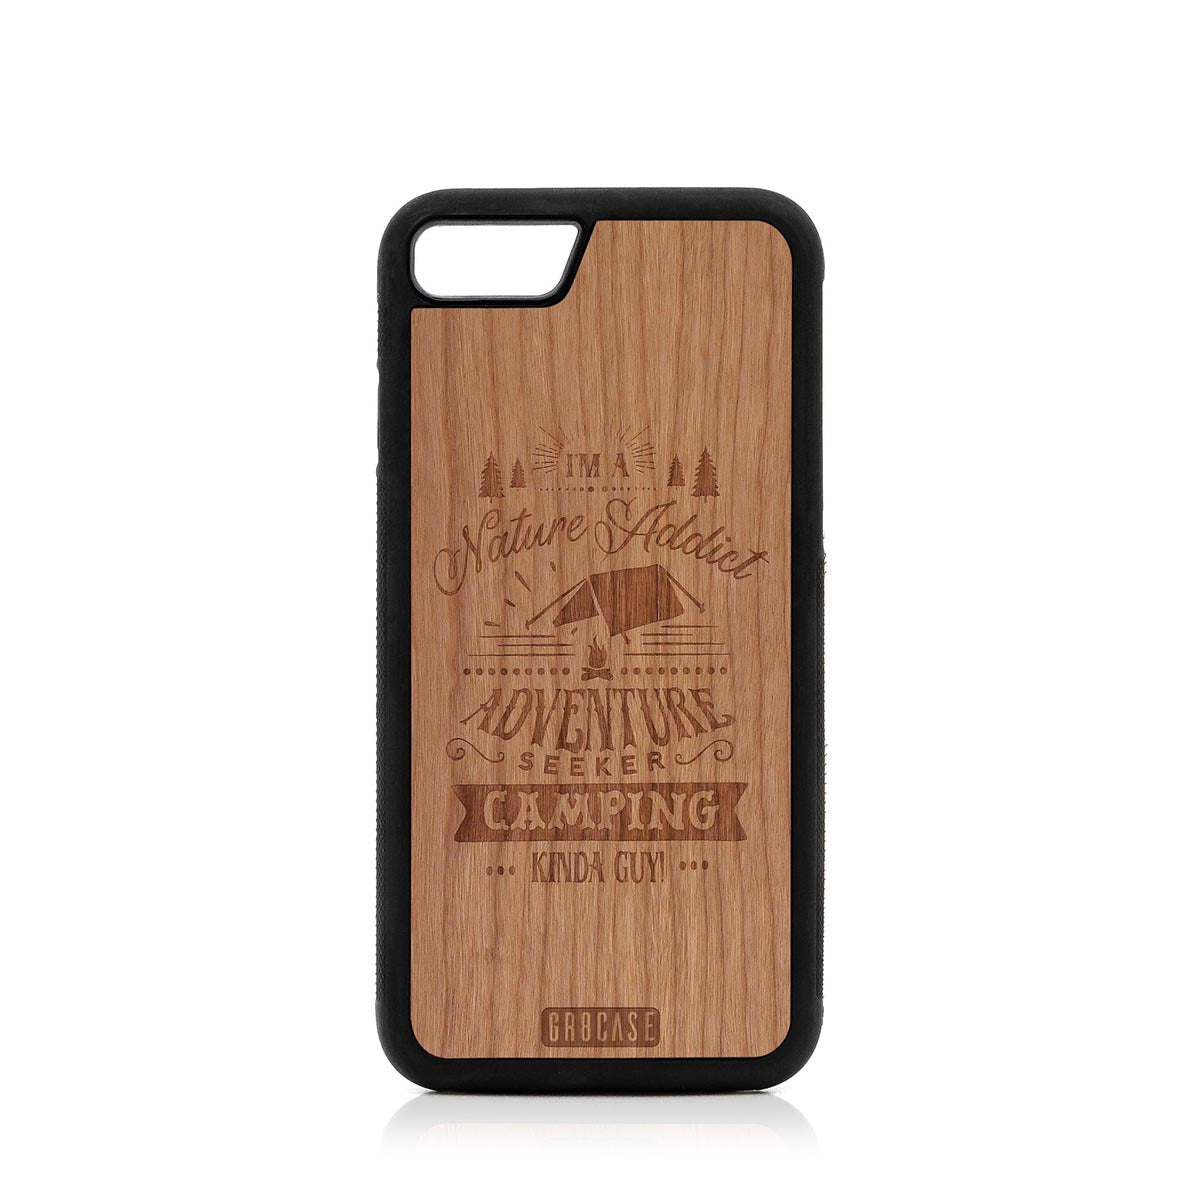 I'm A Nature Addict Adventure Seeker Camping Kinda Guy Design Wood Case For iPhone 7/8 by GR8CASE